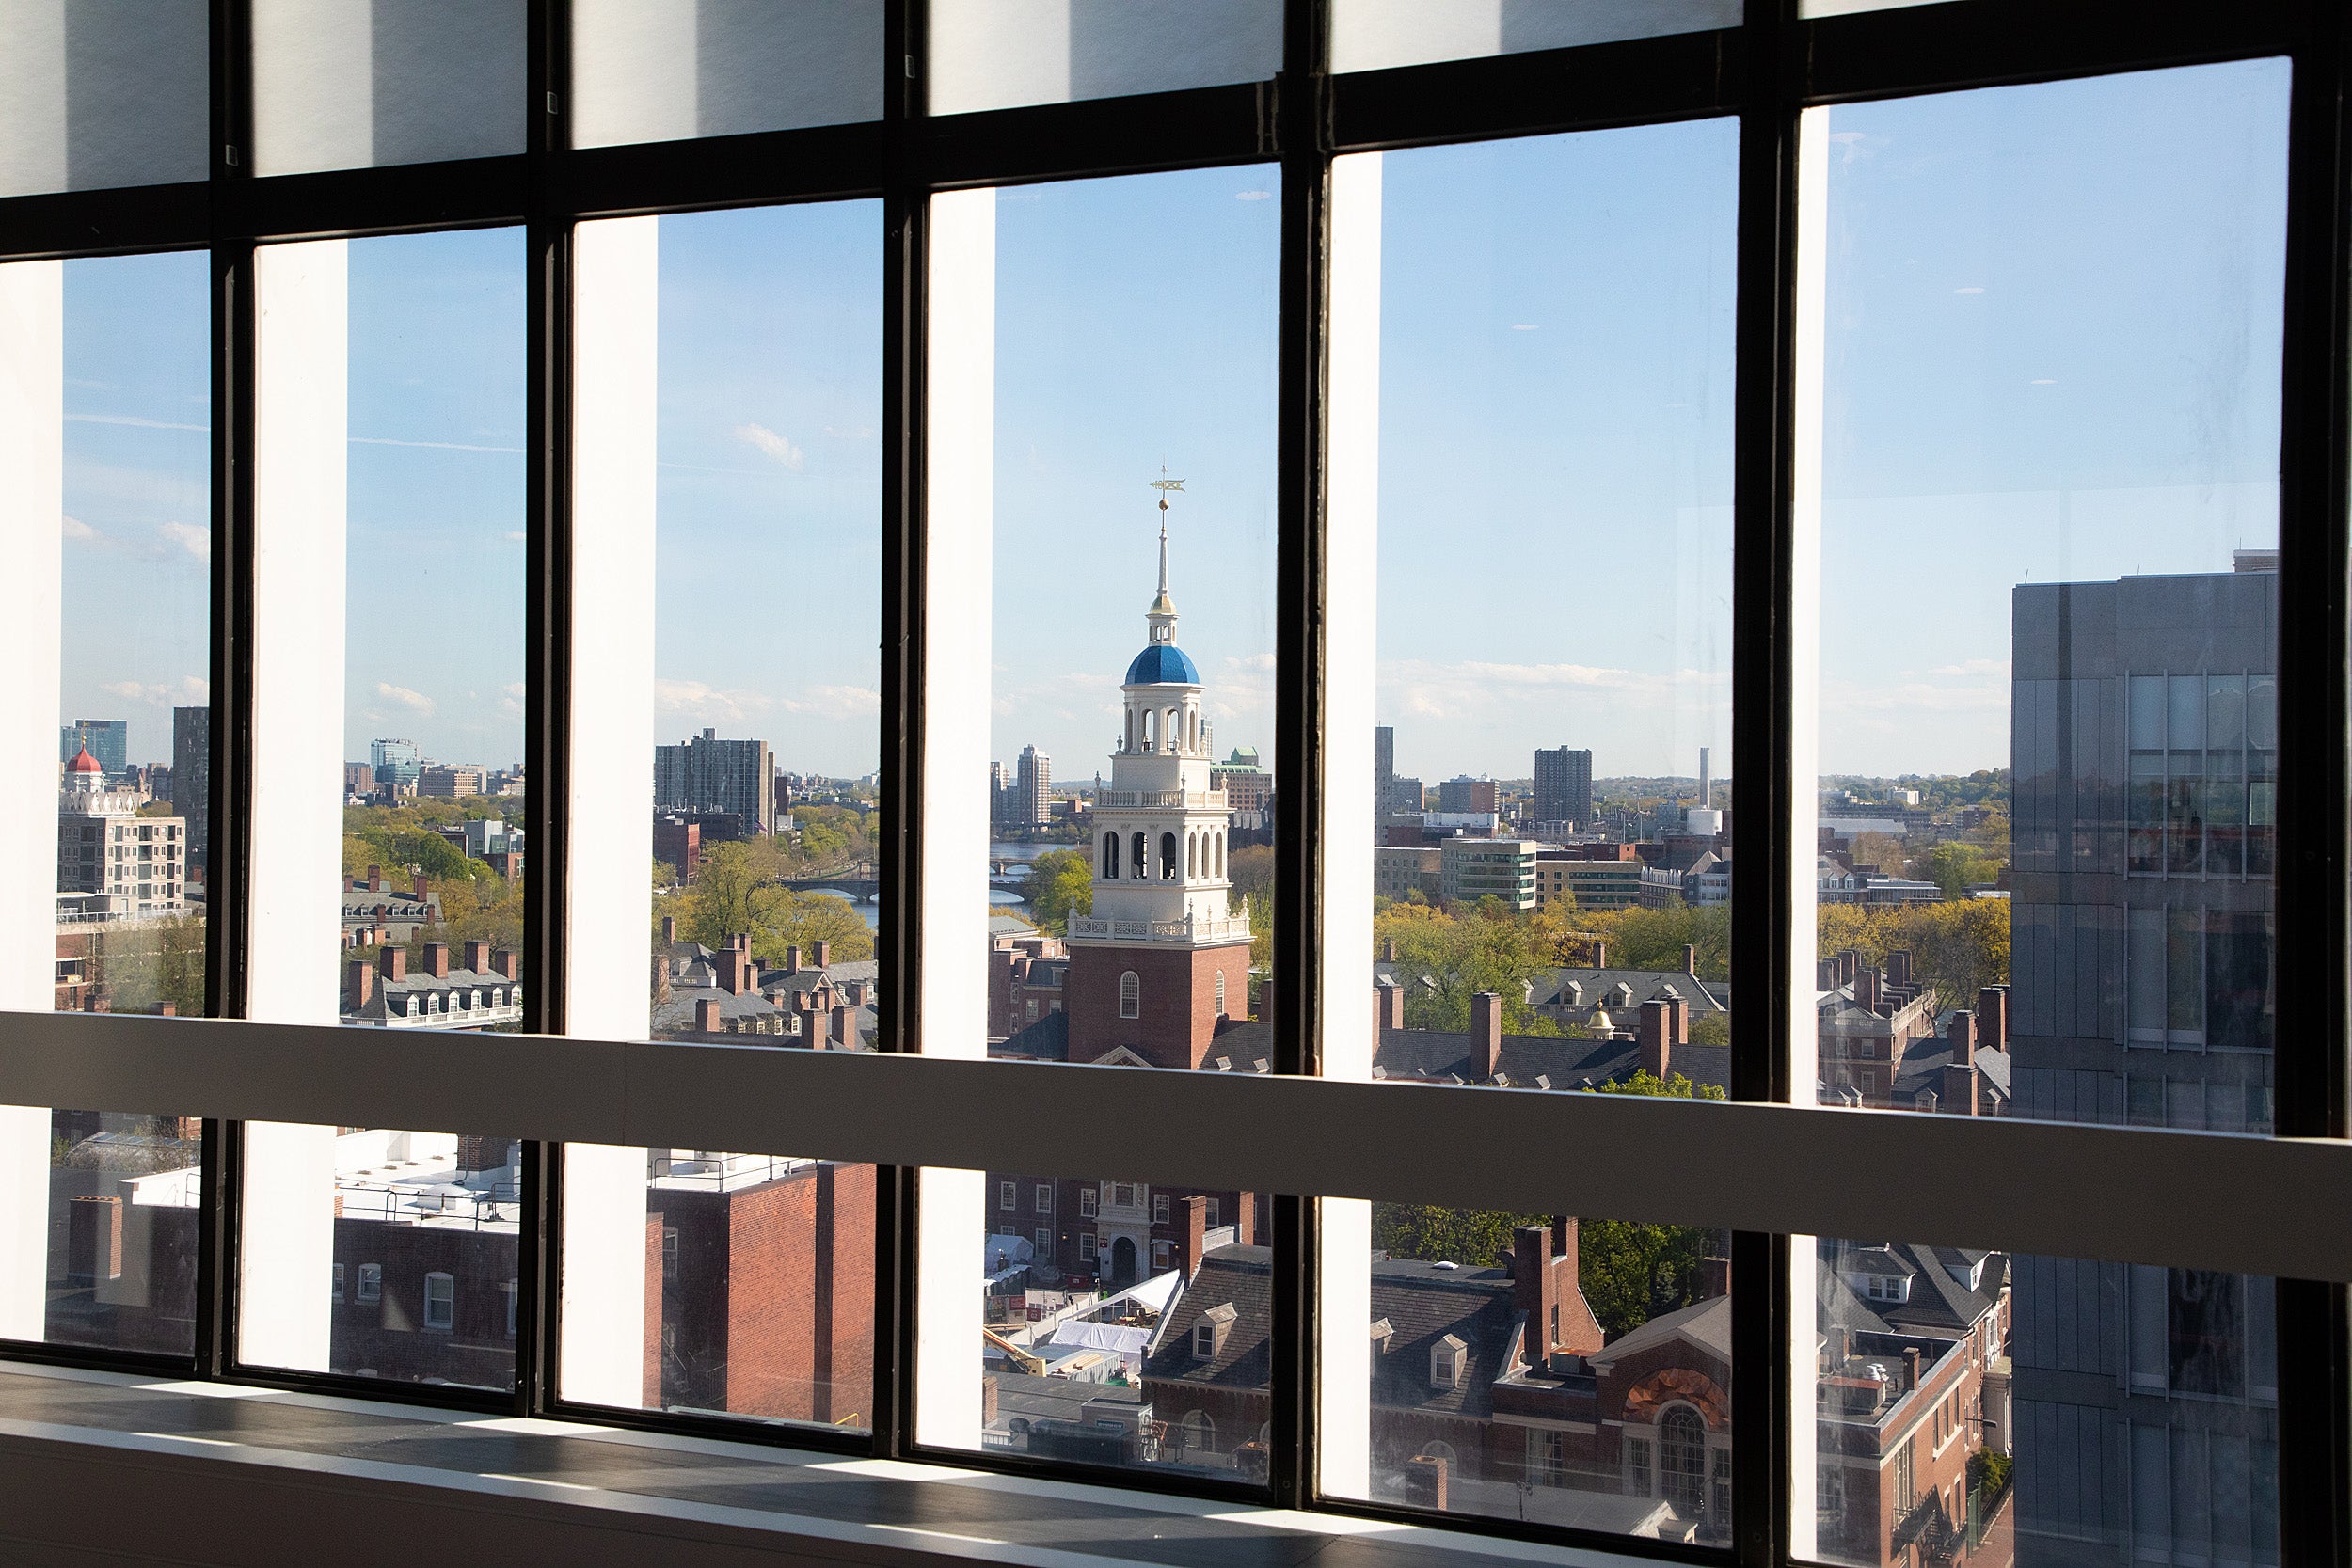 View of Harvard campus from a window.